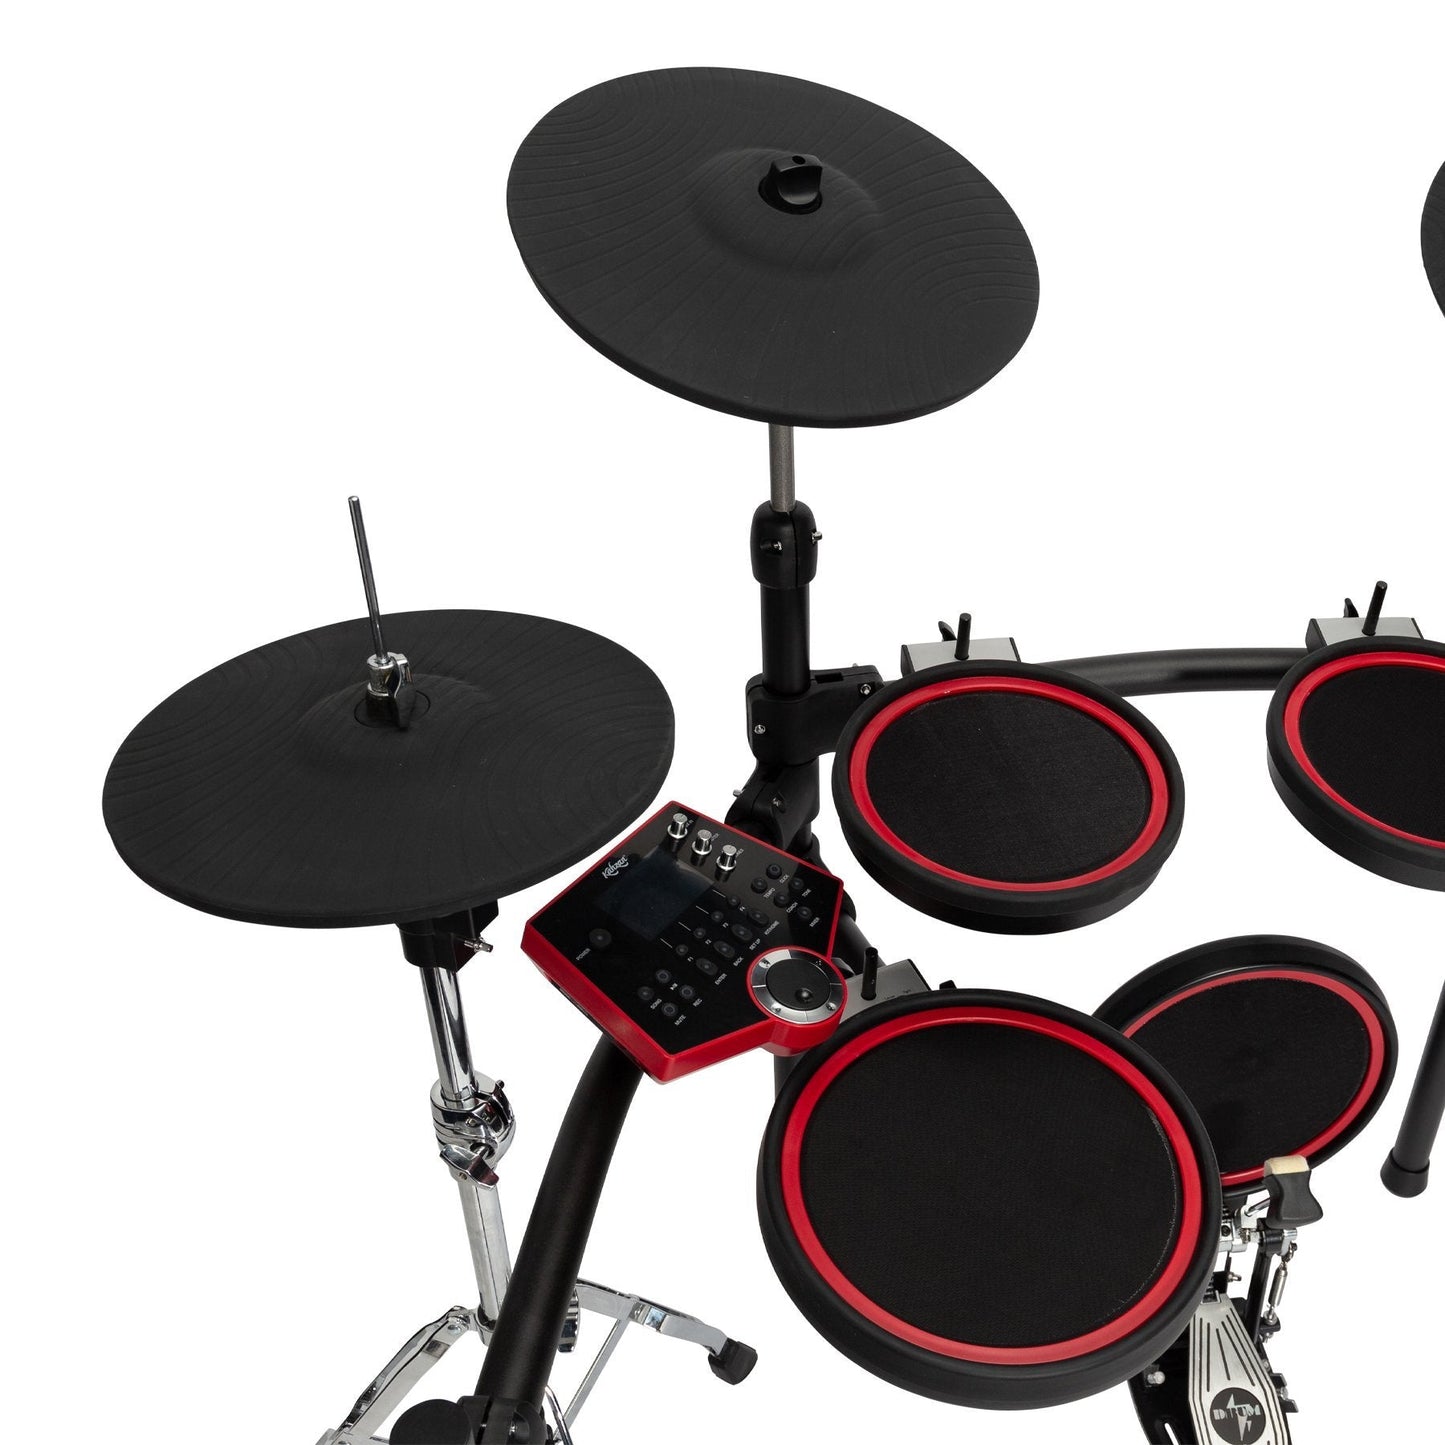 Kahzan MK7X Deluxe 5-Piece Digital Electronic Drum Kit with Bluetooth